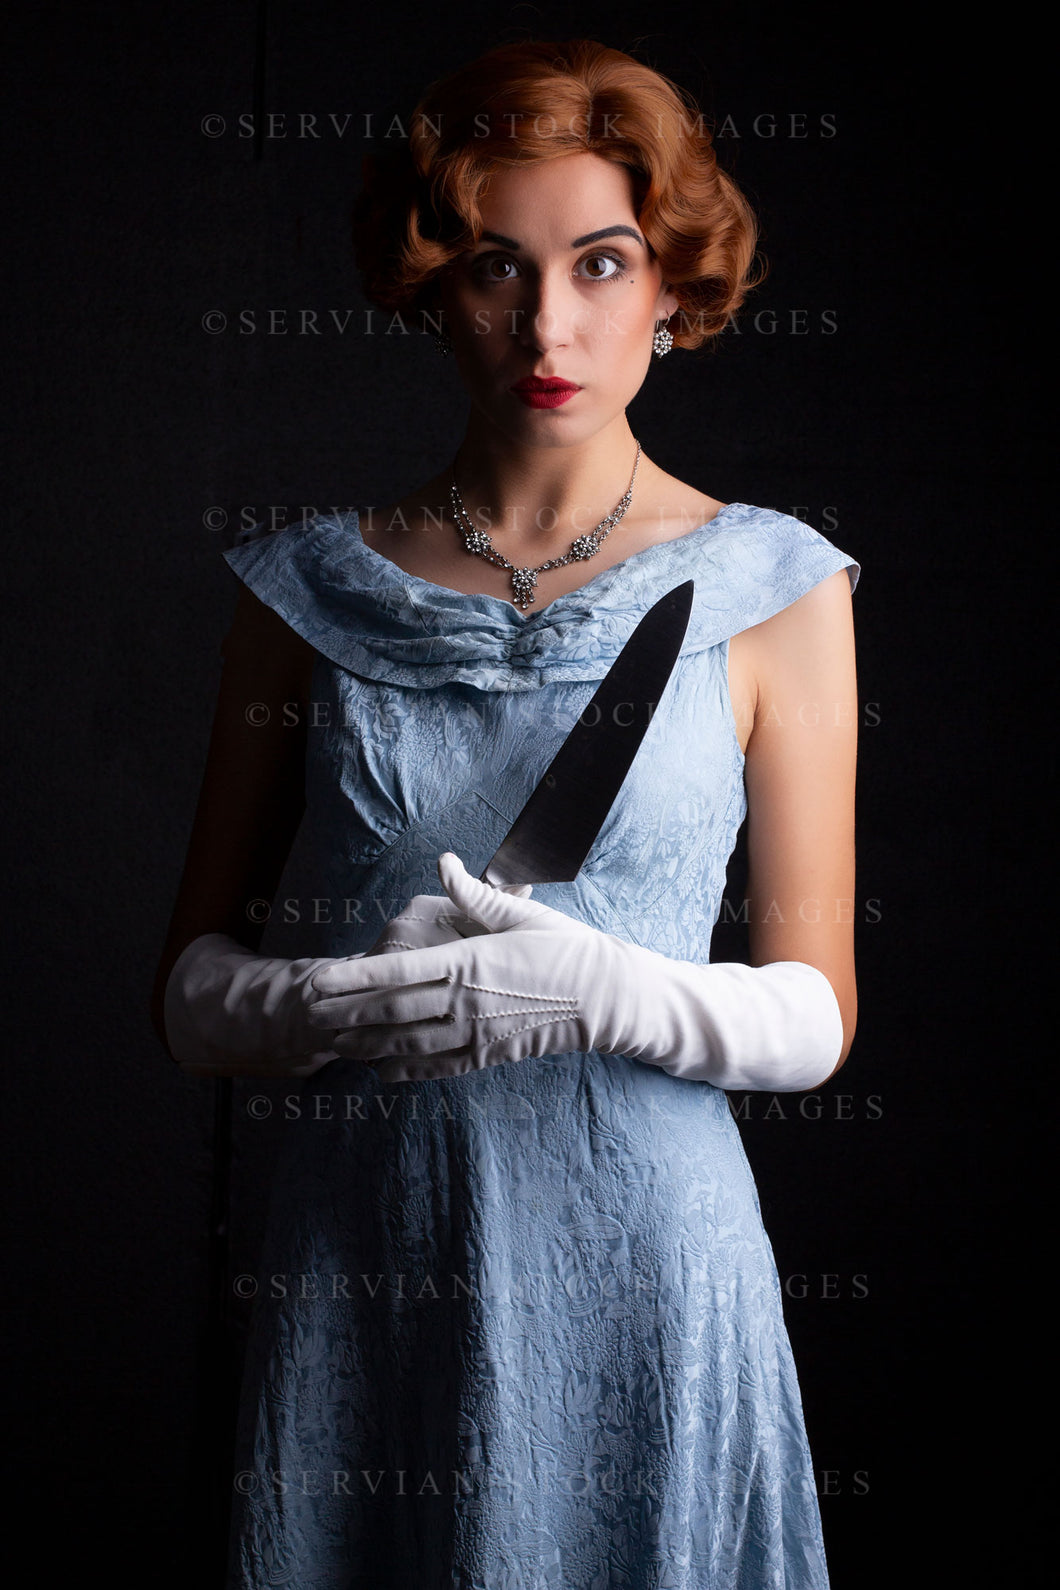 1930s woman wearing a blue vintage dress, long white gloves, and a diamante necklace. She's holding a large kitchen knife against a black backdrop.(Sarah 0257)